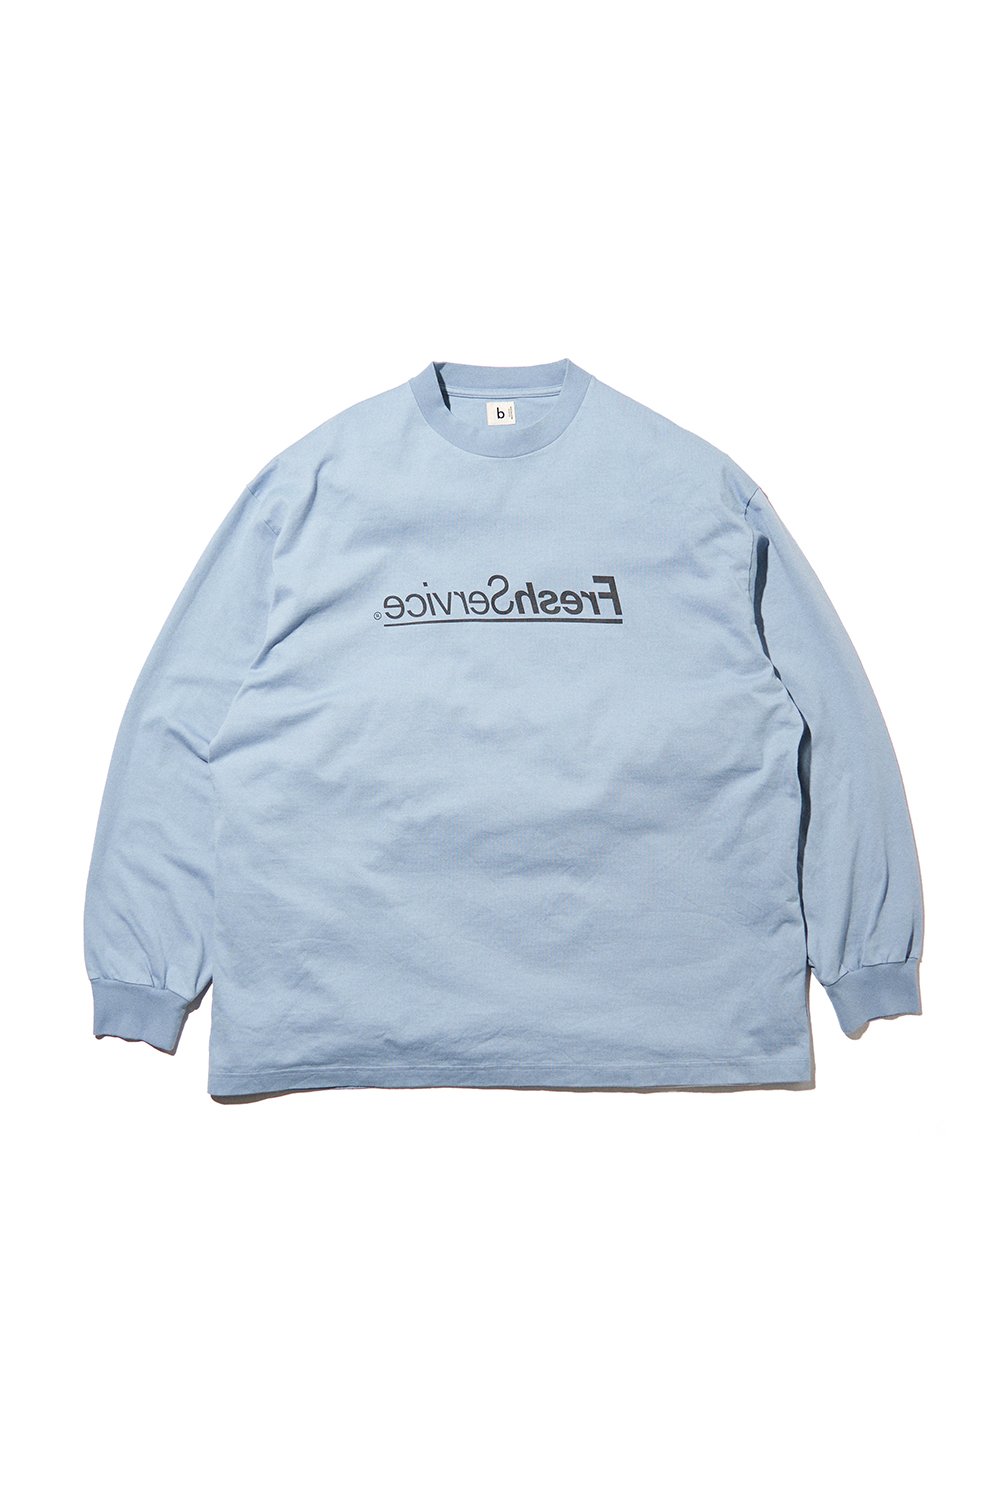 blurhms ROOTSTOCK and FreshService Collaborate on a Long-Sleeve